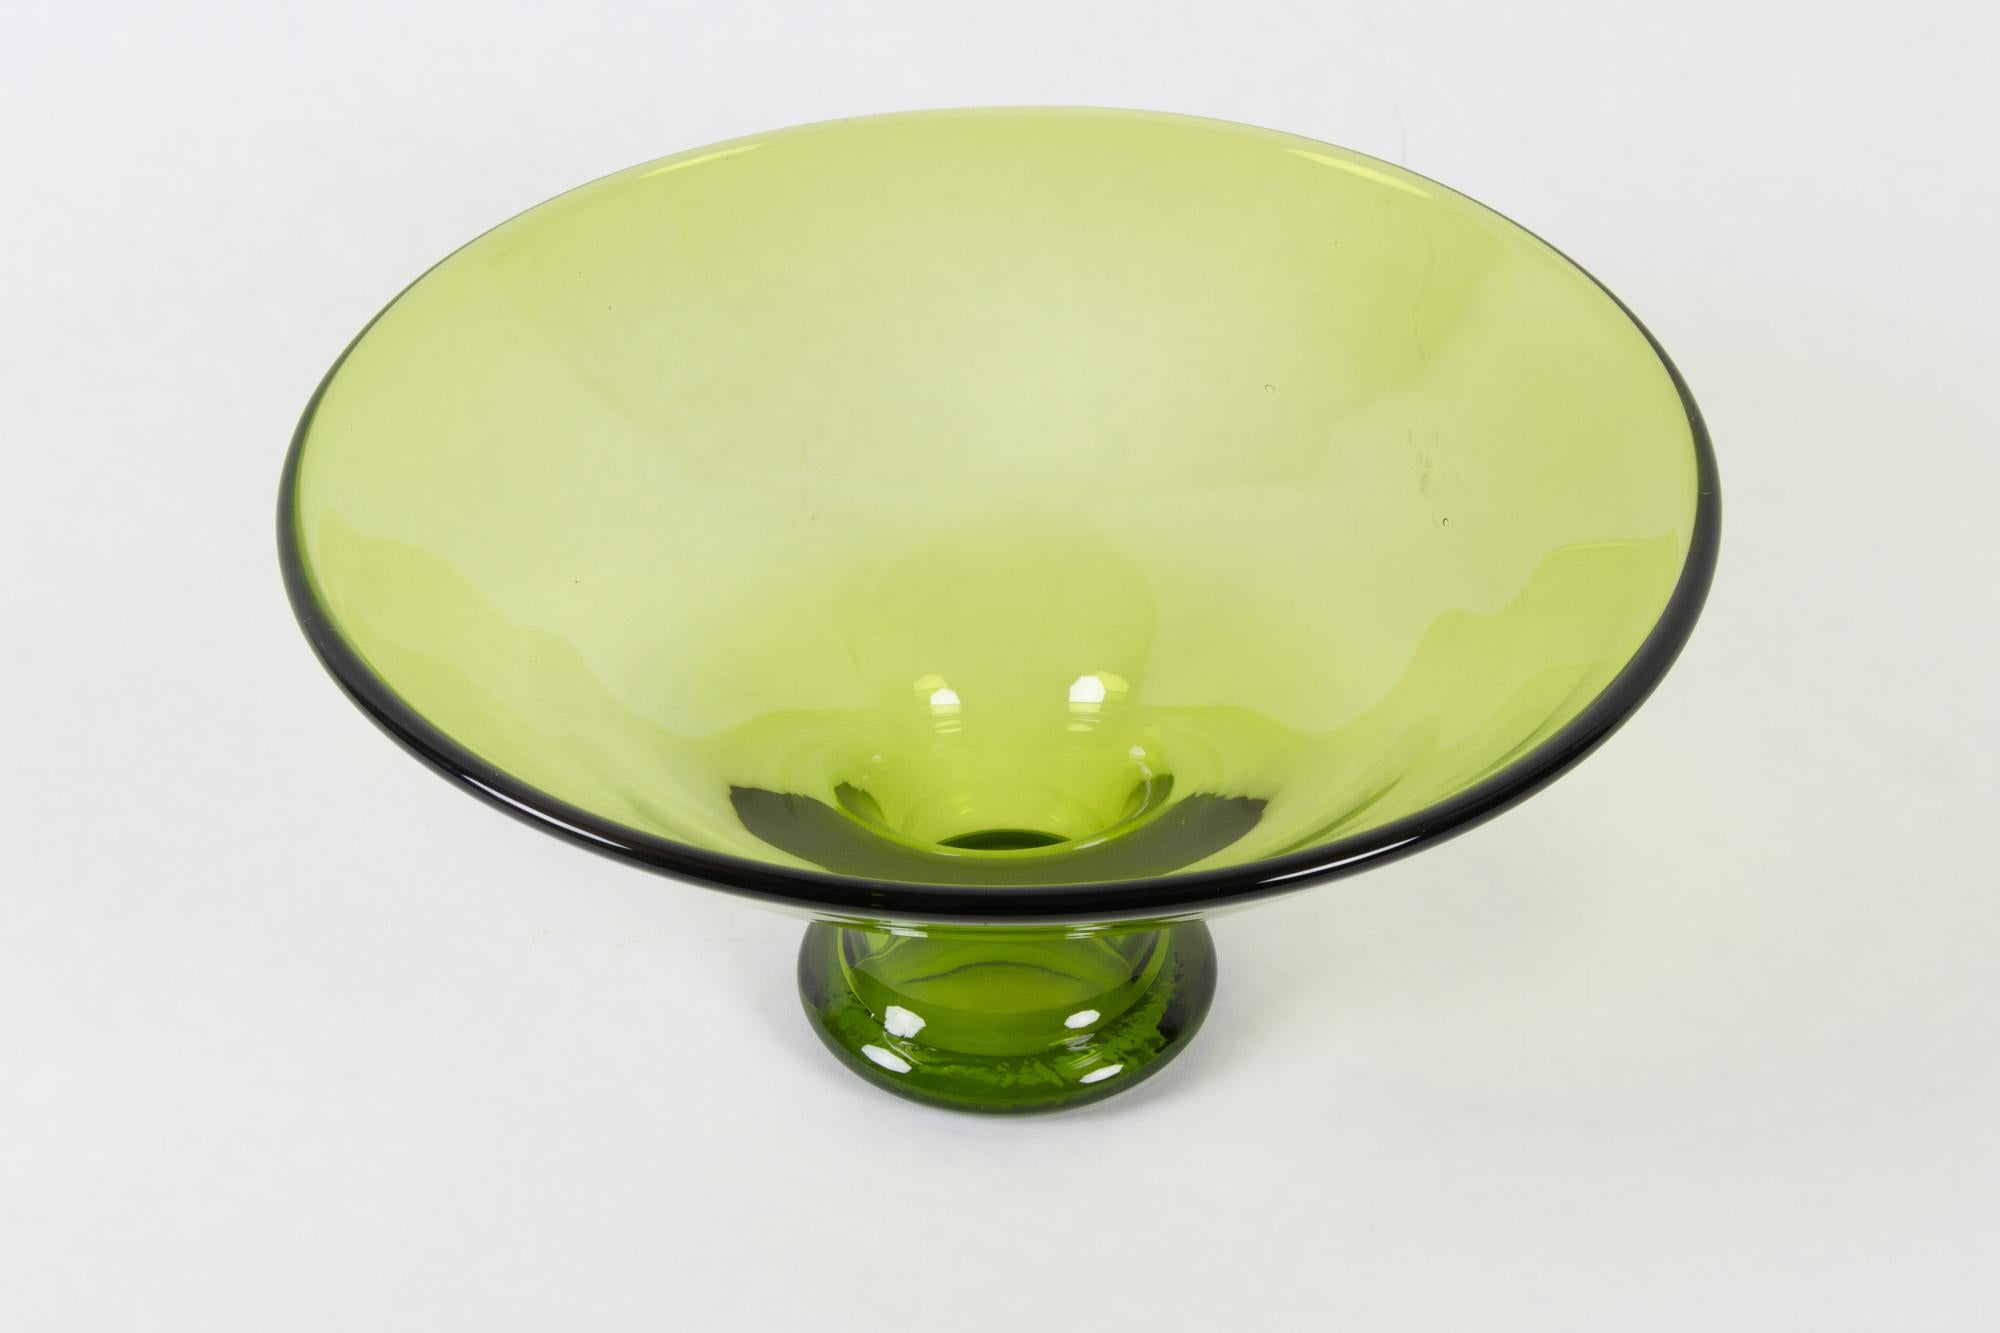 Vintage Danish Maygreen glass bowl by Per Lütken for Holmegaard 1950s
Large centerpiece bowl in green glass designed by Danish artist Per Lütken in 1955. Part of the Maygreen series of different items in this particular light green nuance. This